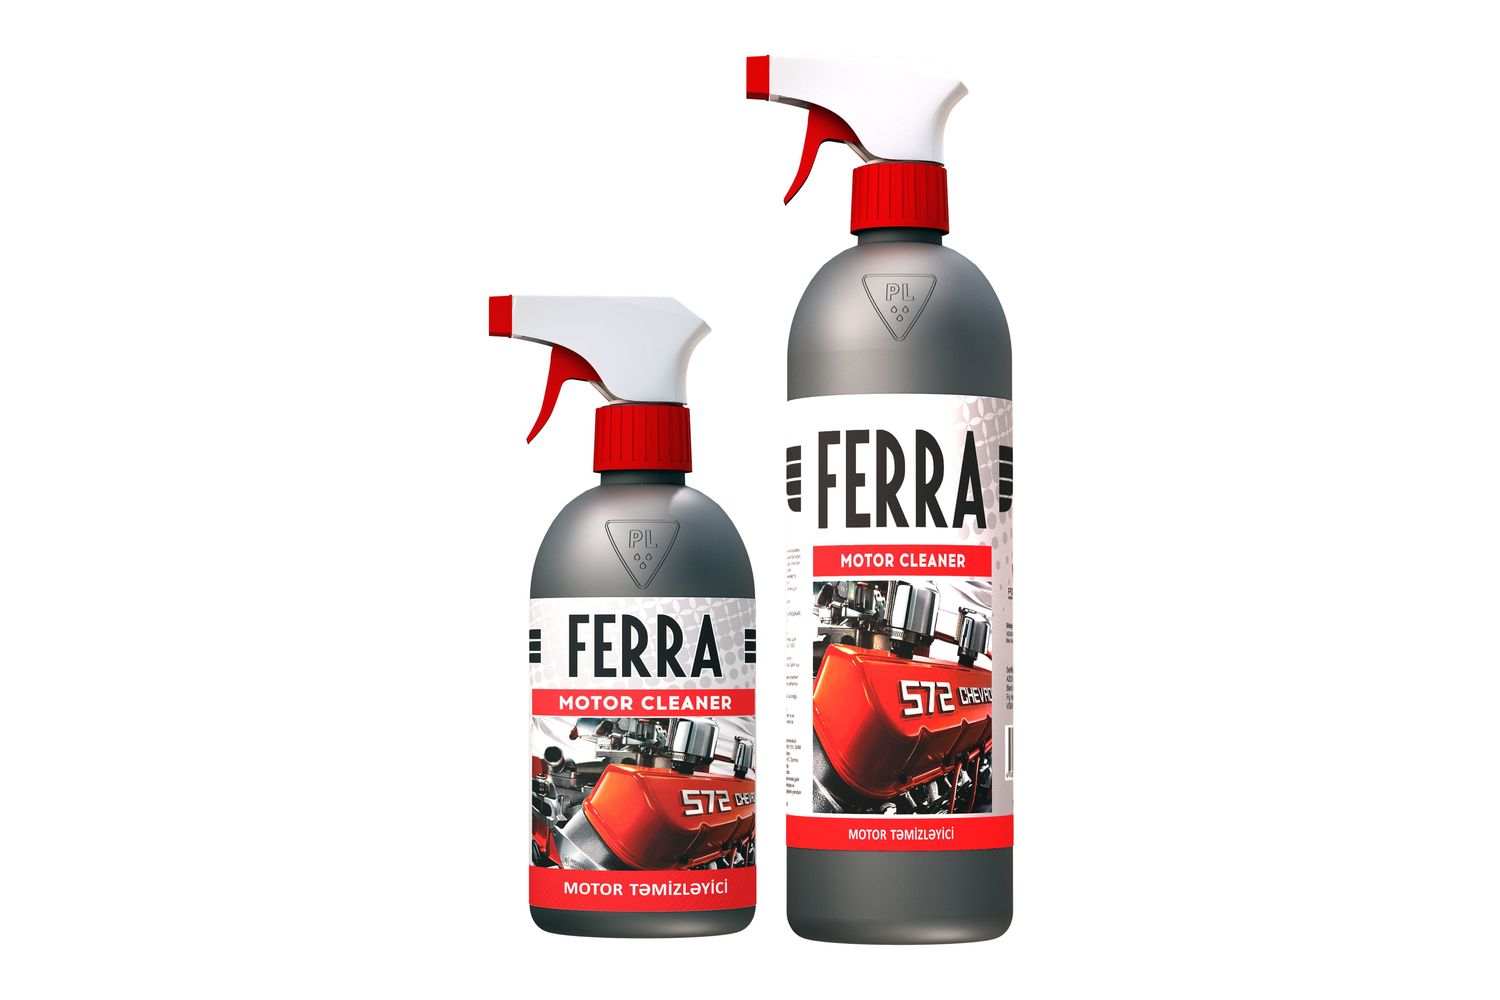 <span style="font-weight: bold;">FERRA motor cleaner</span>